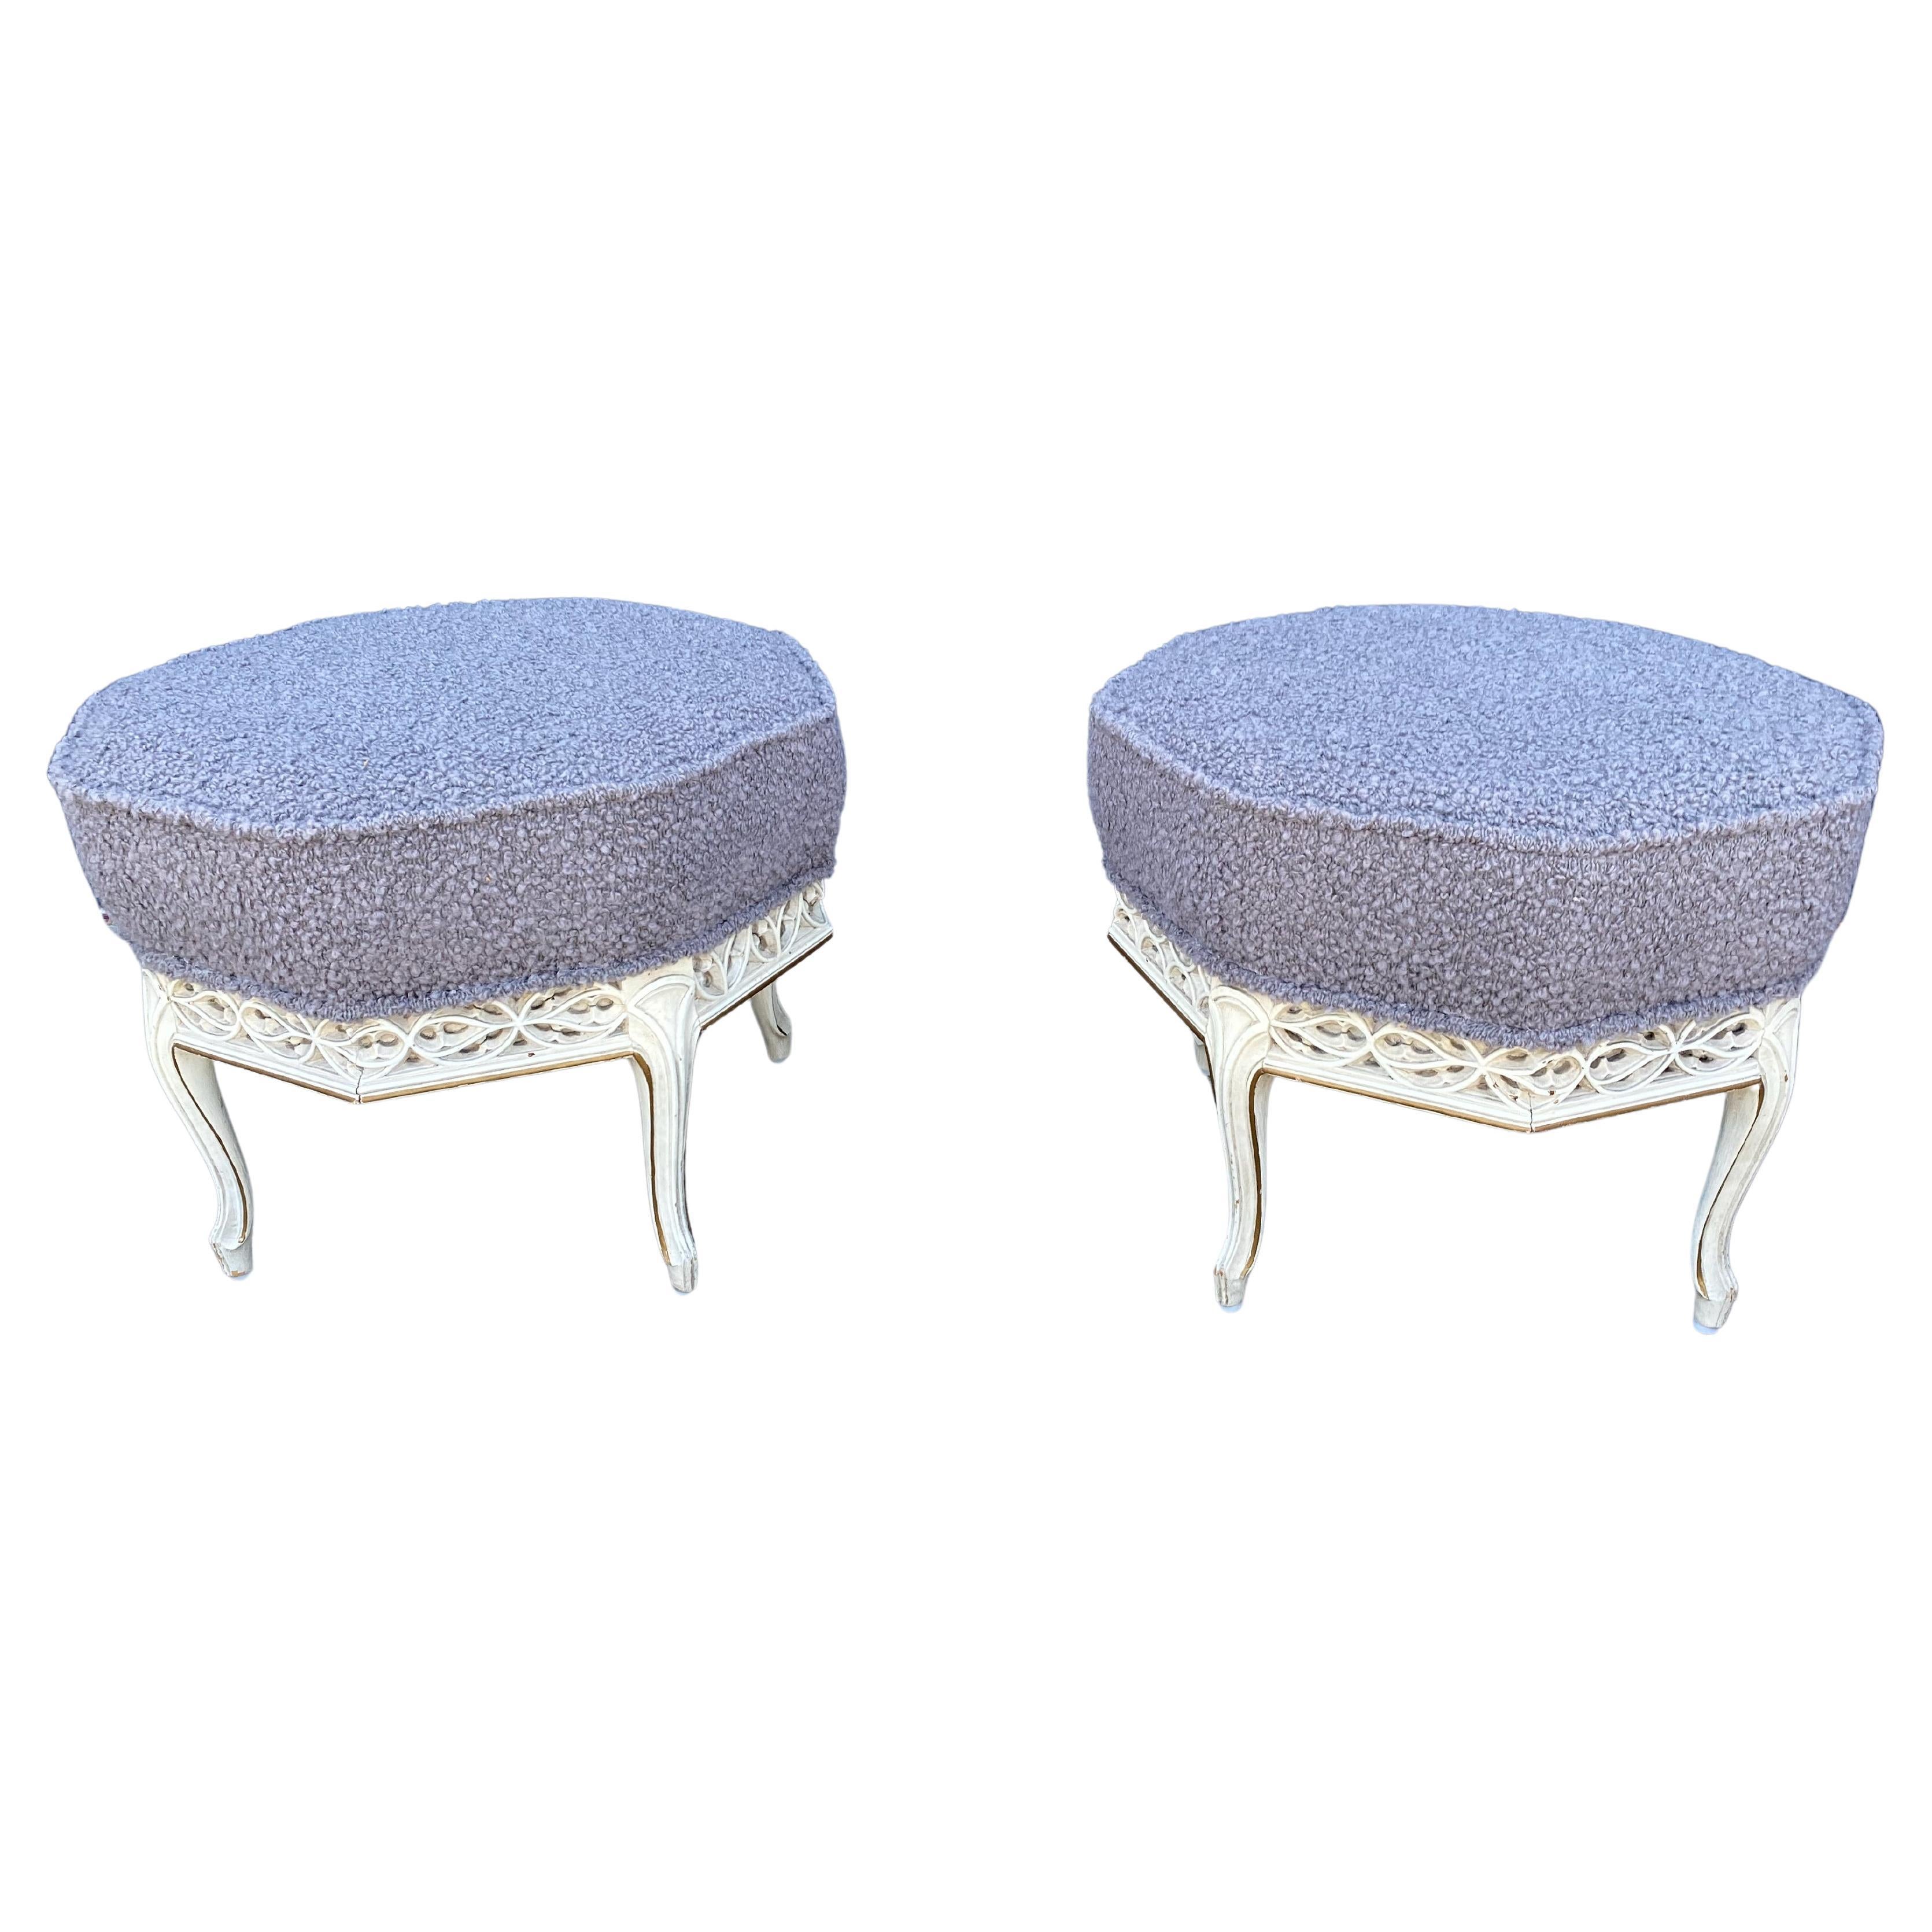 Pair Gothic-Style Stools